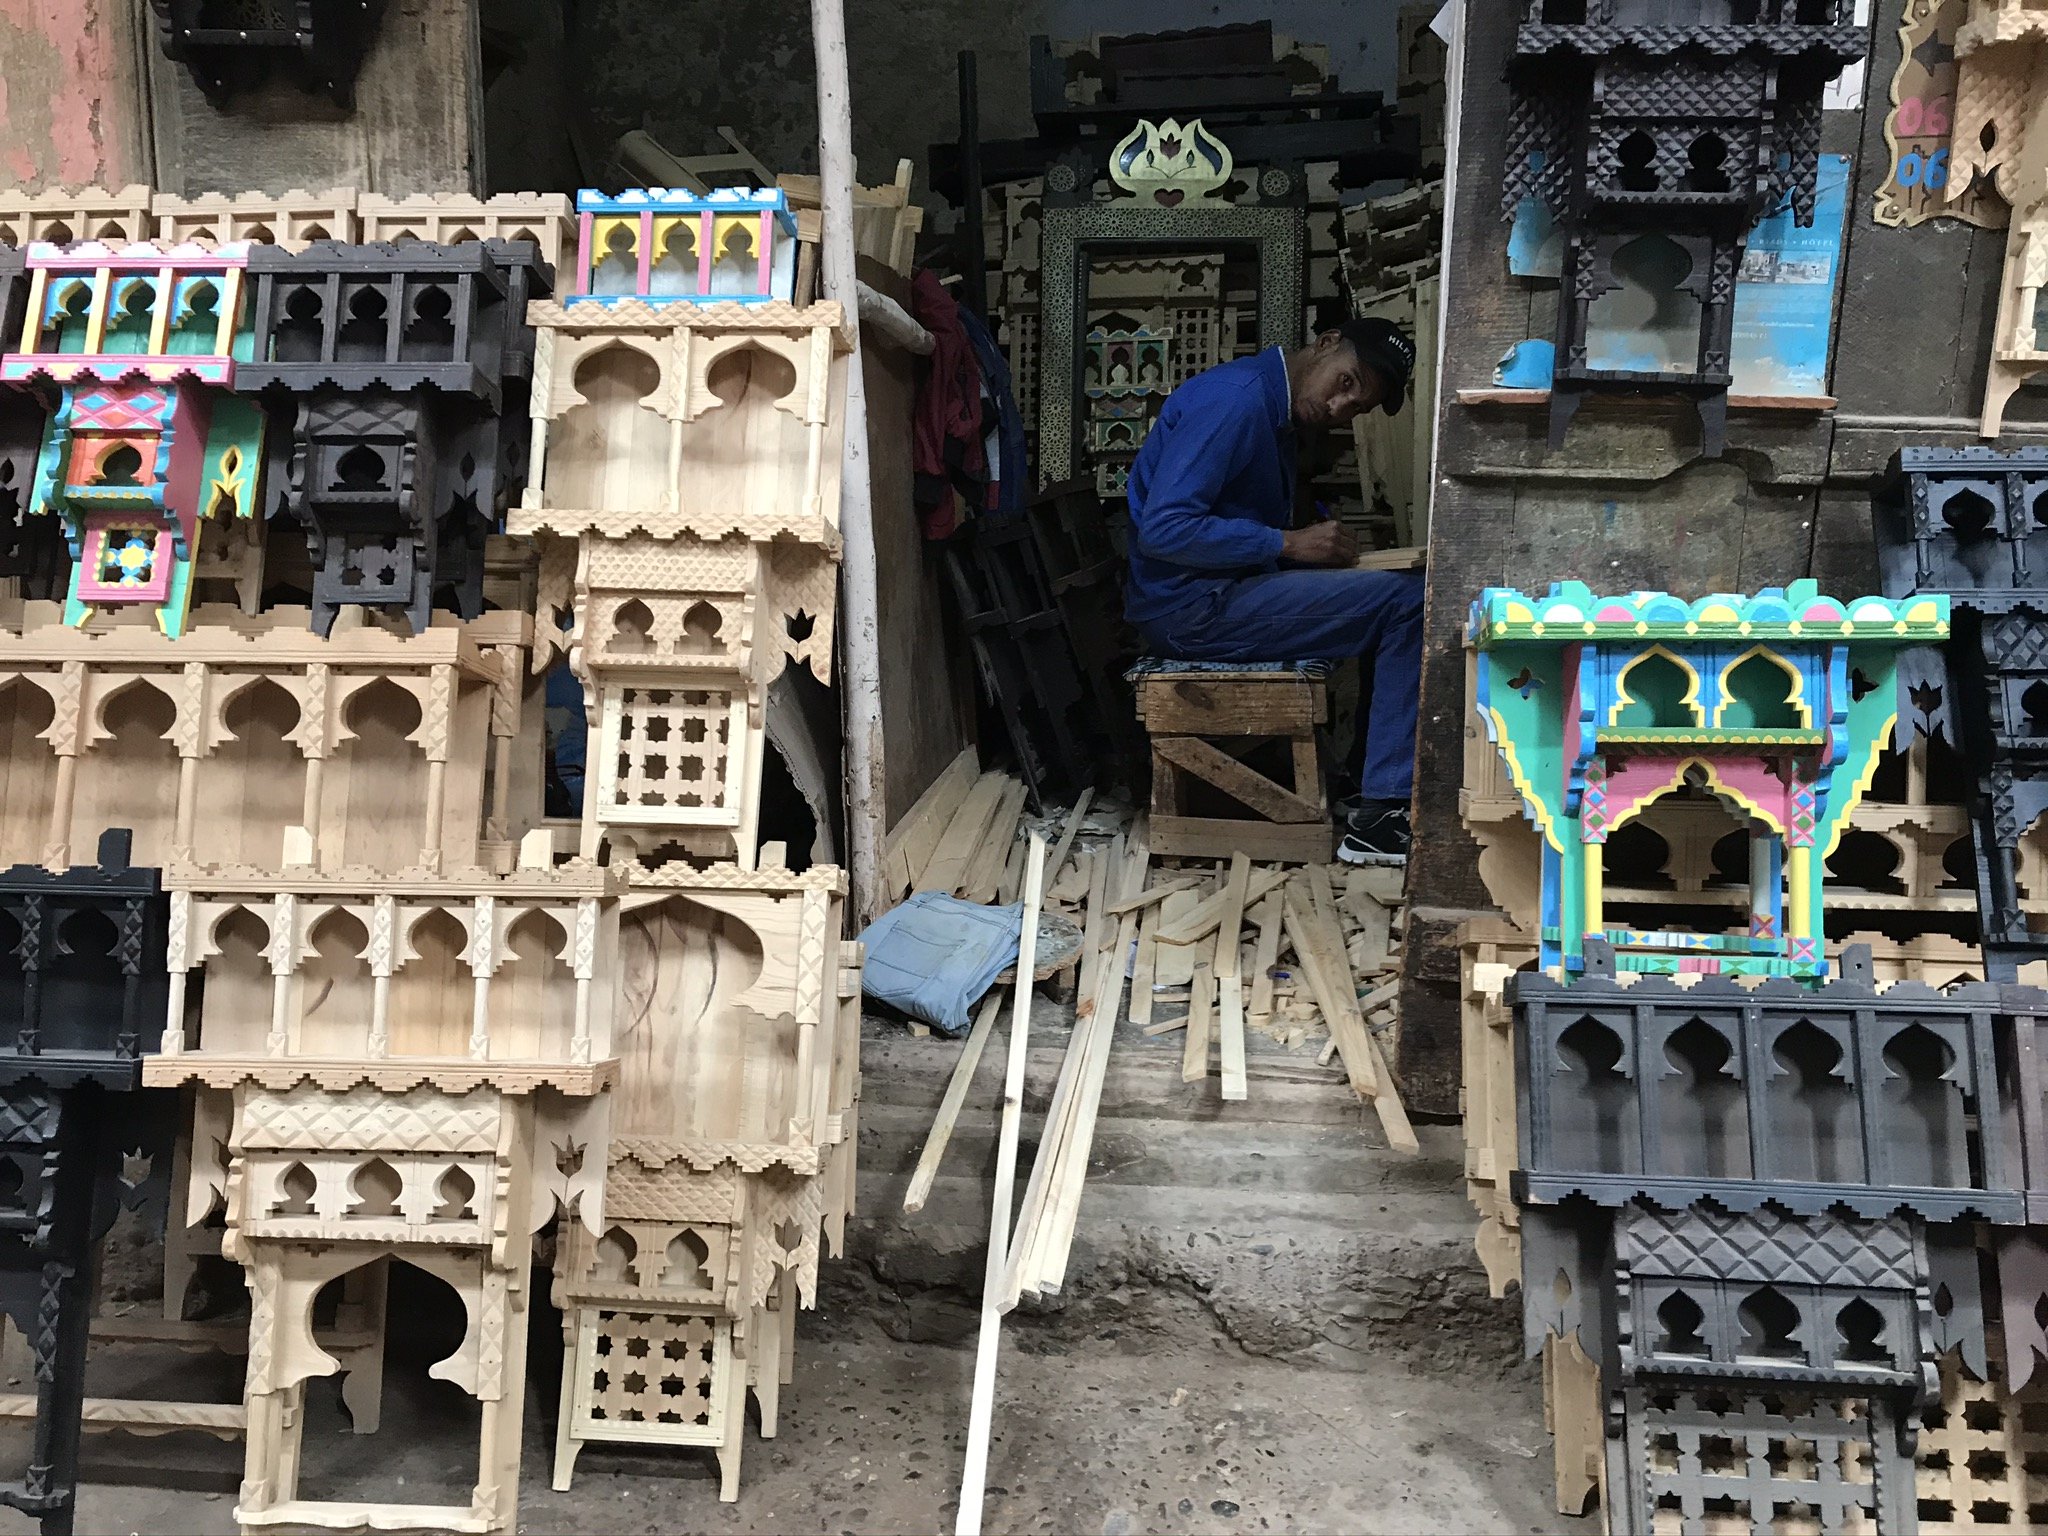  PICTURED: An artisan makes shelves in the traditional Moroccan style inside the souk of Rissani. PC: Andrew Corbley © 